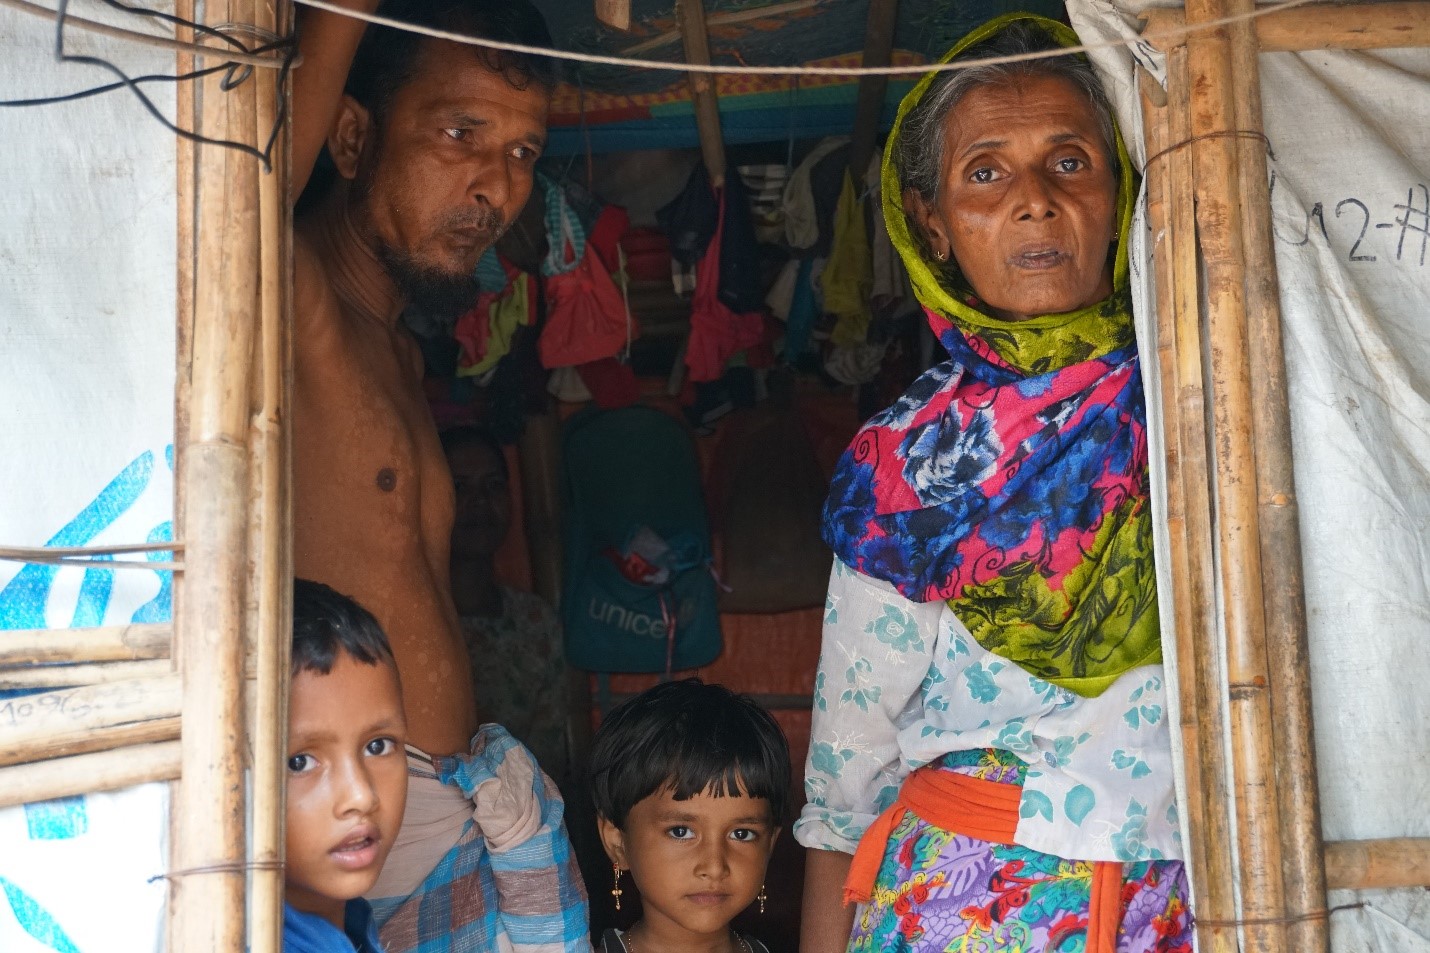 Backed by strong public health operational support, Bangladesh has effectively limited the impact of COVID-19 in Cox's Bazar, where around 850,000 Rohingya refugees reside. WHO Bangladesh/Tatiana Almeida.